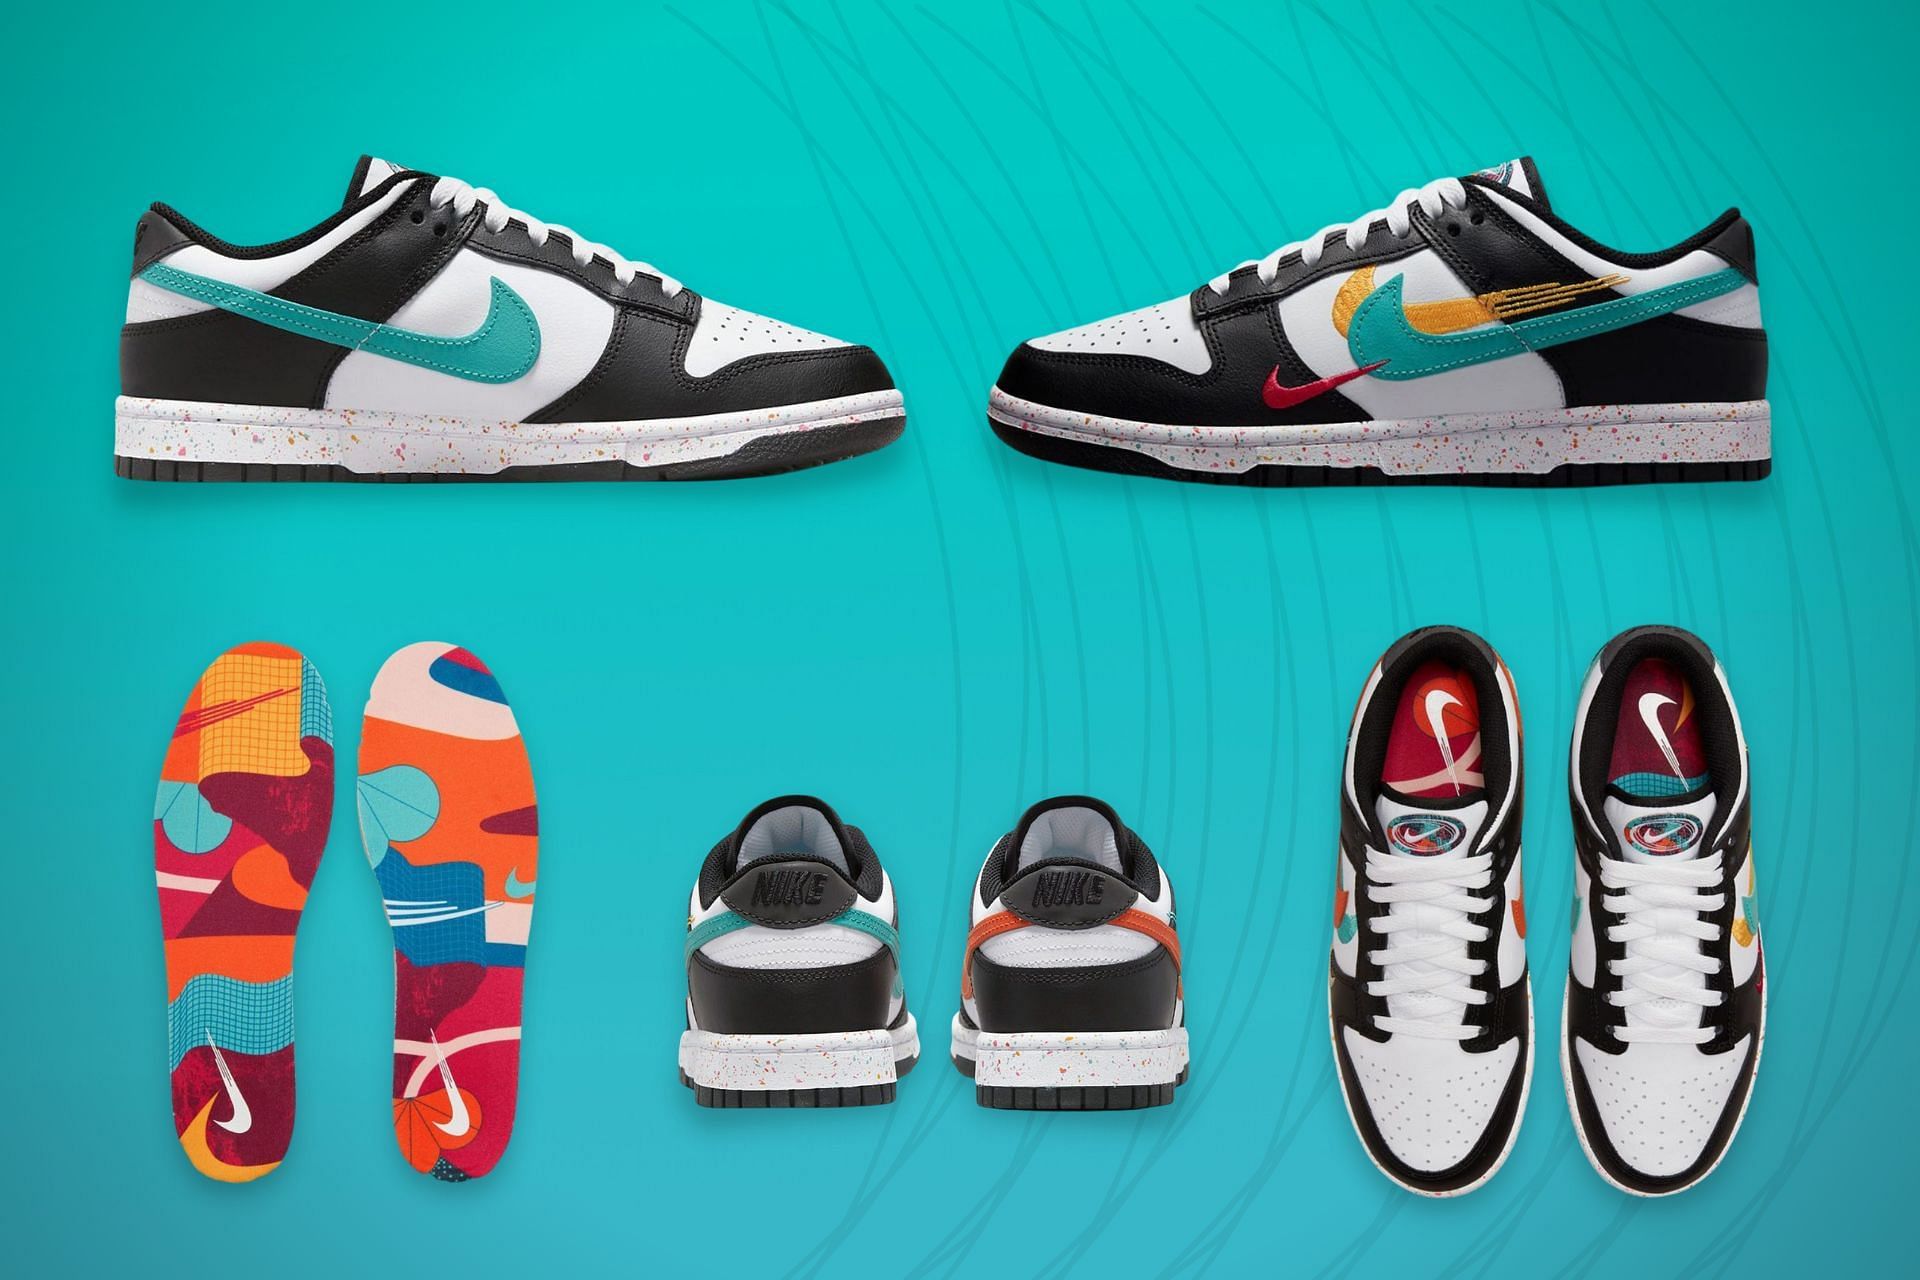 Where roger federer nike tennis shoes to buy Nike Dunk Low “Multicolor Swoosh” shoes? Price and